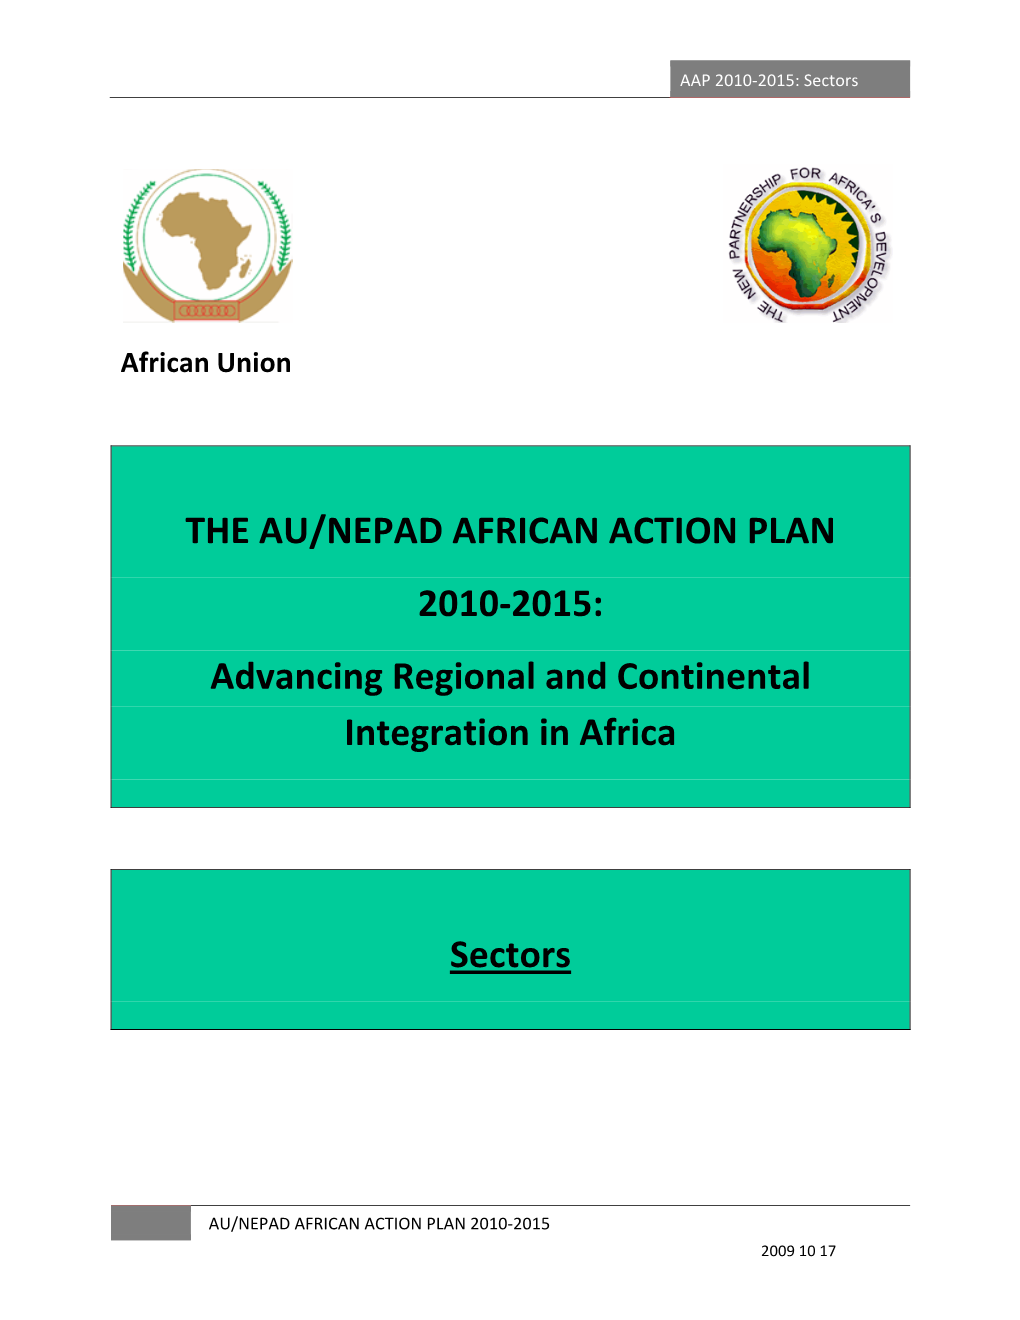 The Au/Nepad African Action Plan 2010-2015